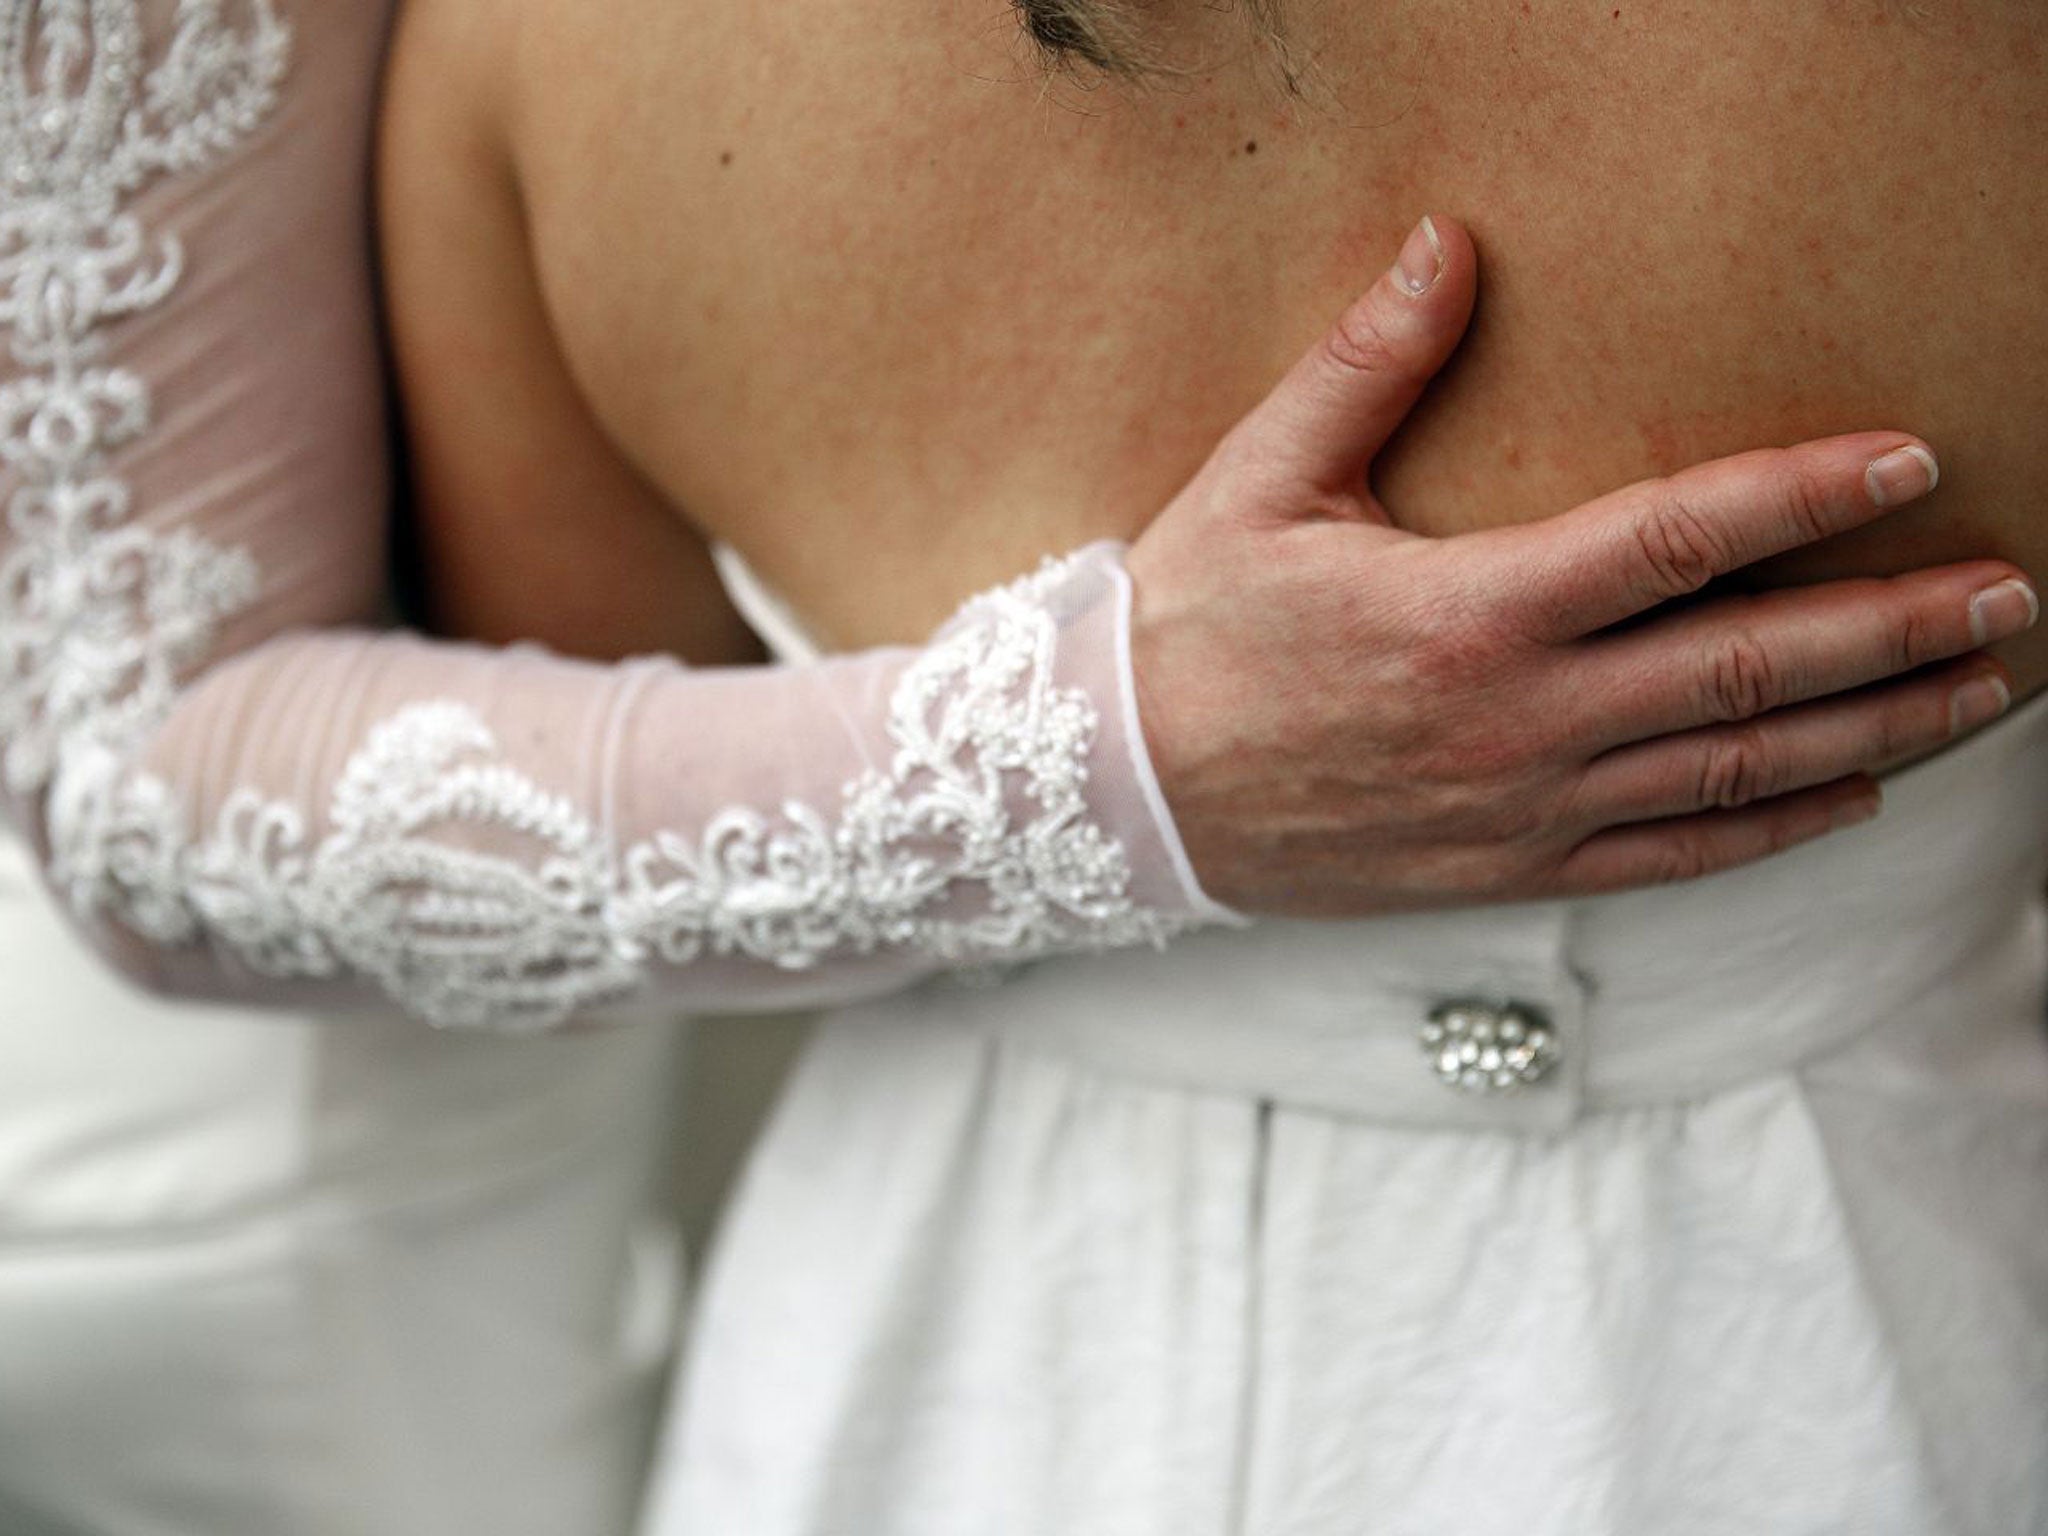 The Government said now was not the time to allow civil partnerships for straight couples